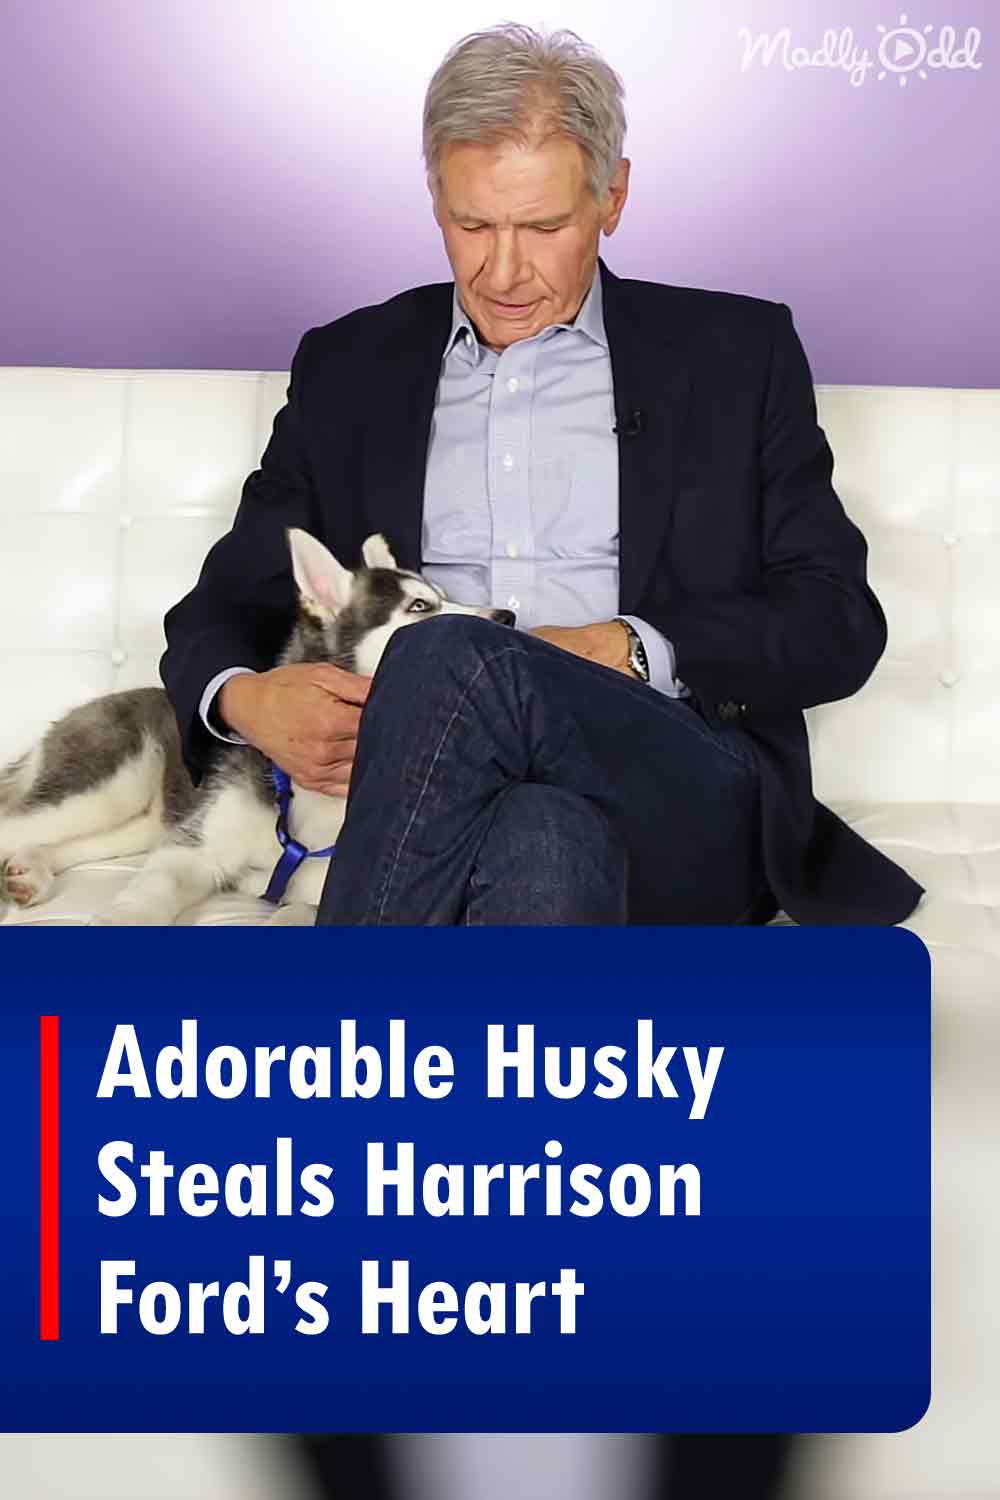 Adorable Husky Steals Harrison Ford’s Heart